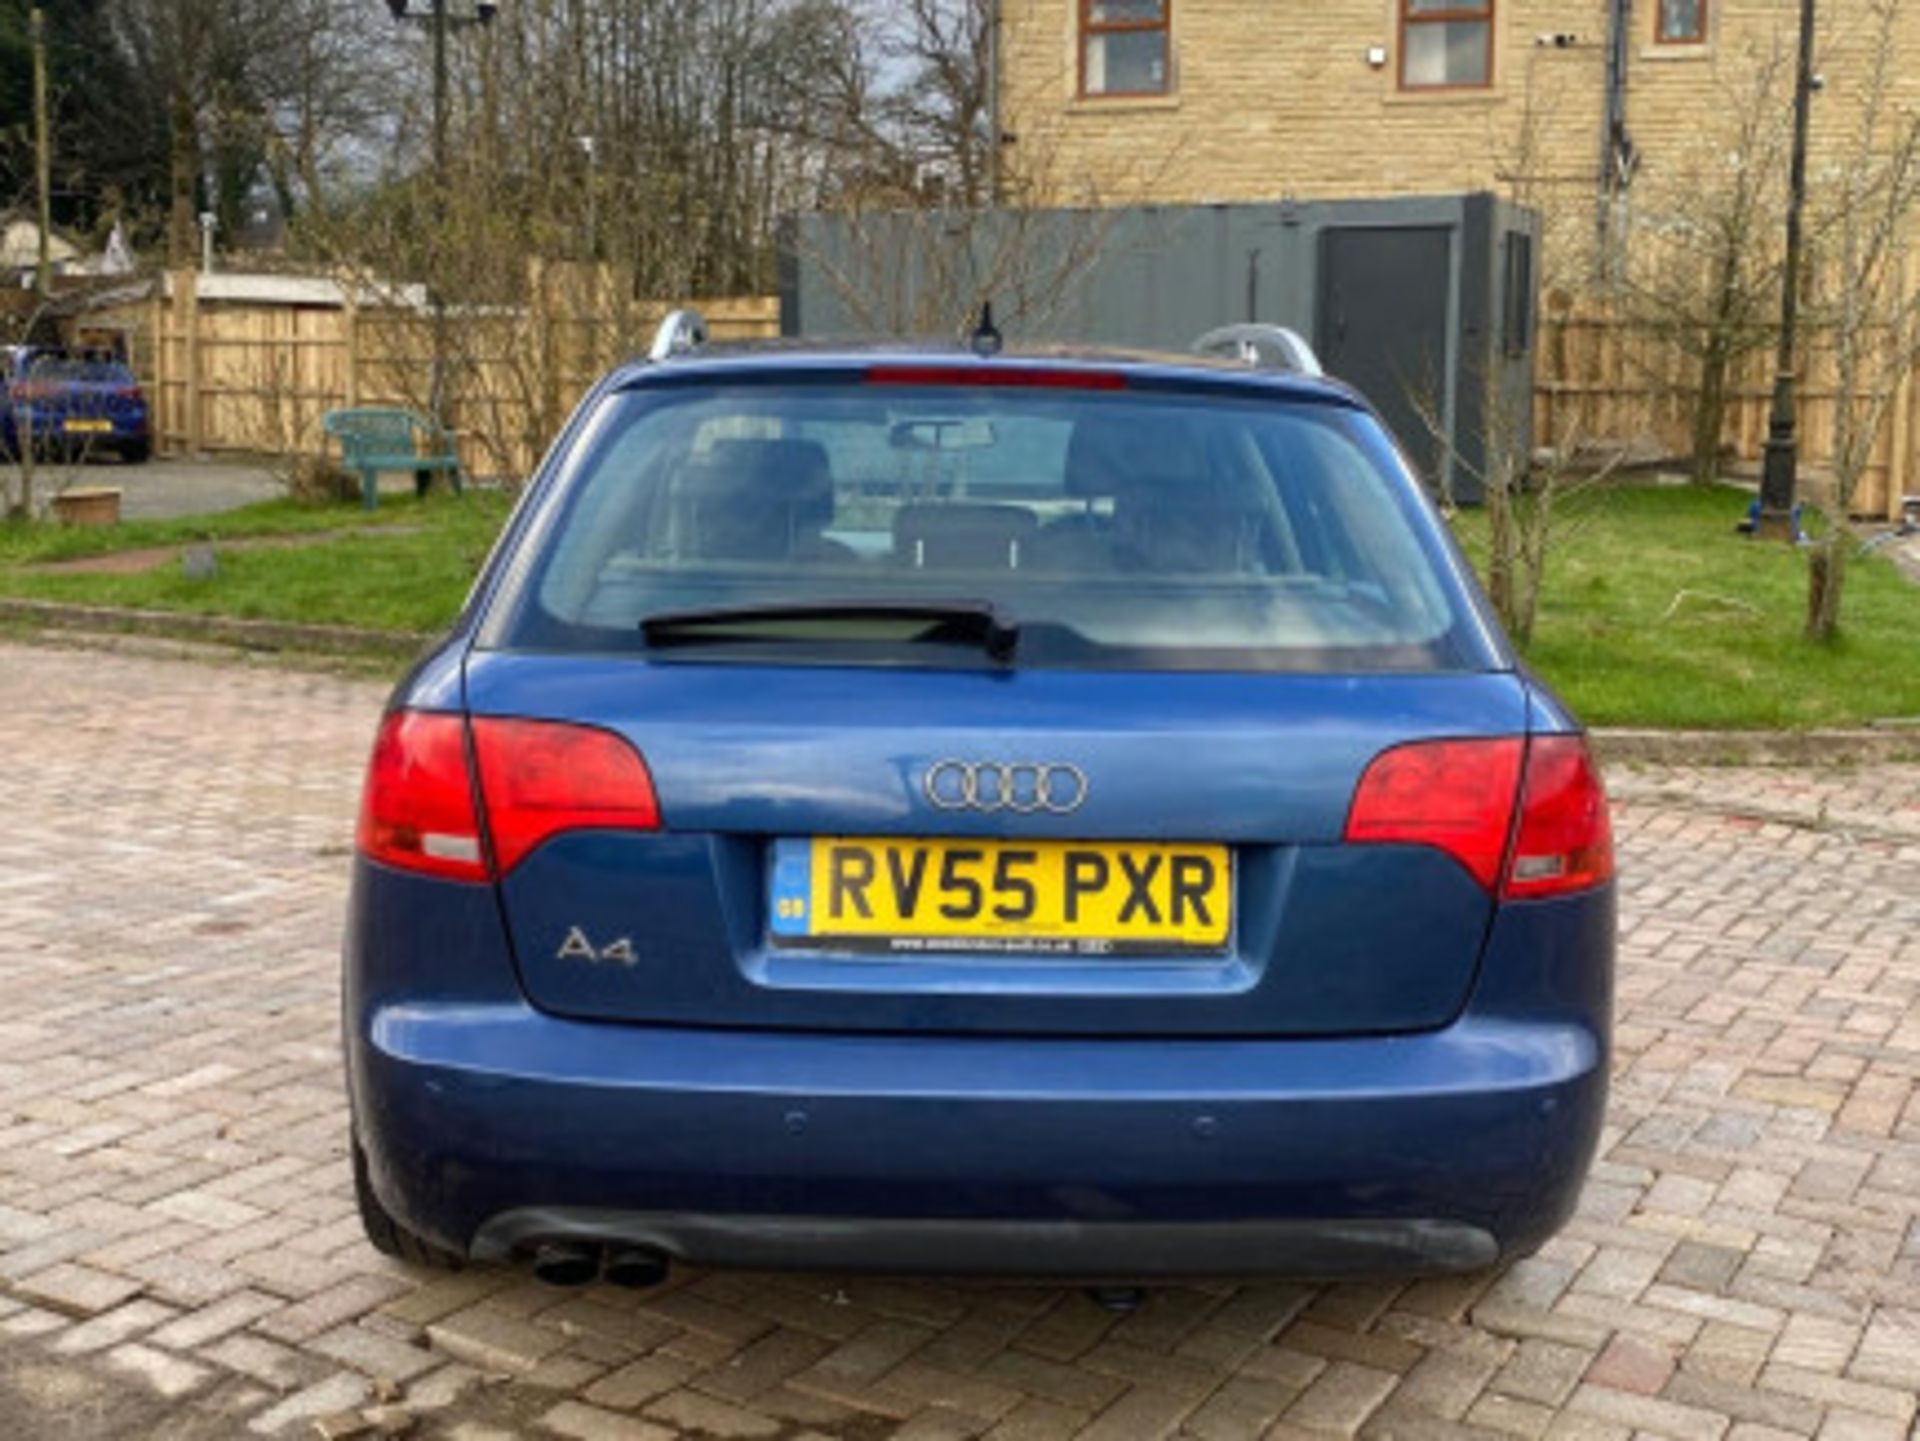 AUDI A4 AVANT 1.9 TDI SE 5DR ESTATE - RARE AND RELIABLE LUXURY WAGON >>--NO VAT ON HAMMER--<< - Image 25 of 63